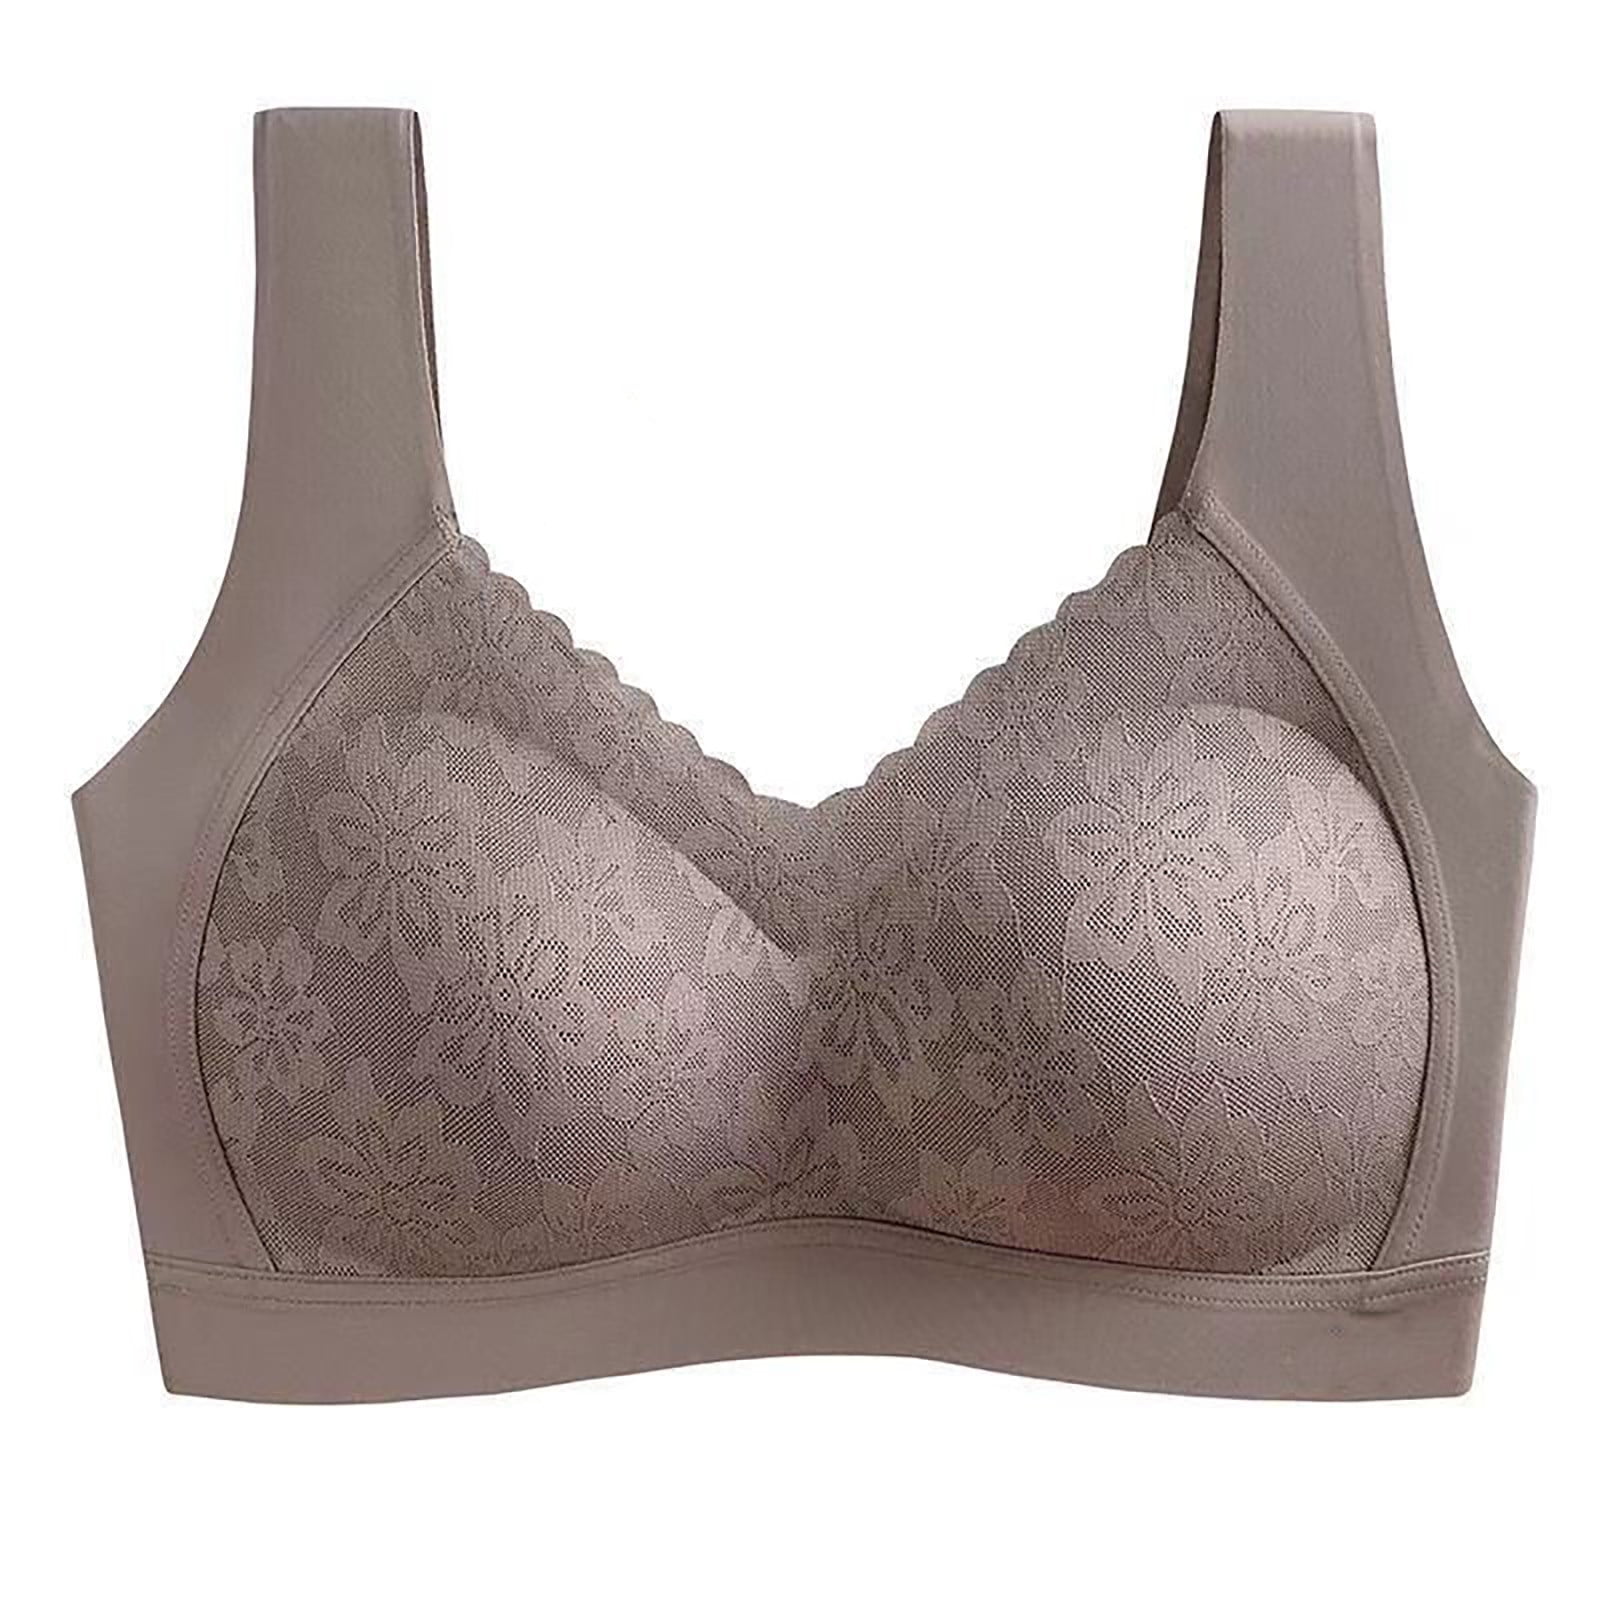 BELLZELY Sports Bras for Women Clearance Lace Lingerie Wire Free